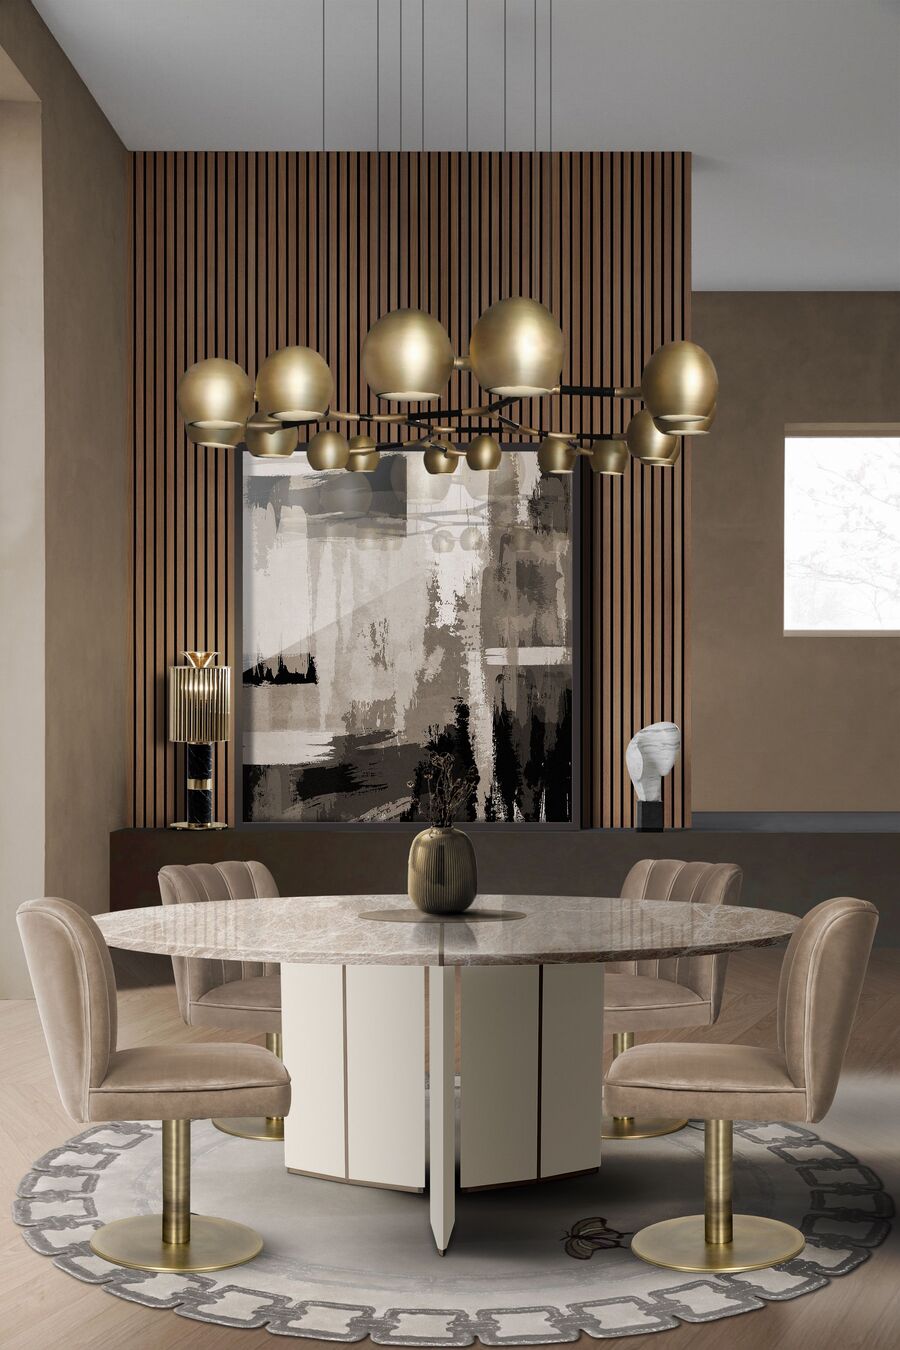 modern beige and neutral tones with four swivel chairs dining room